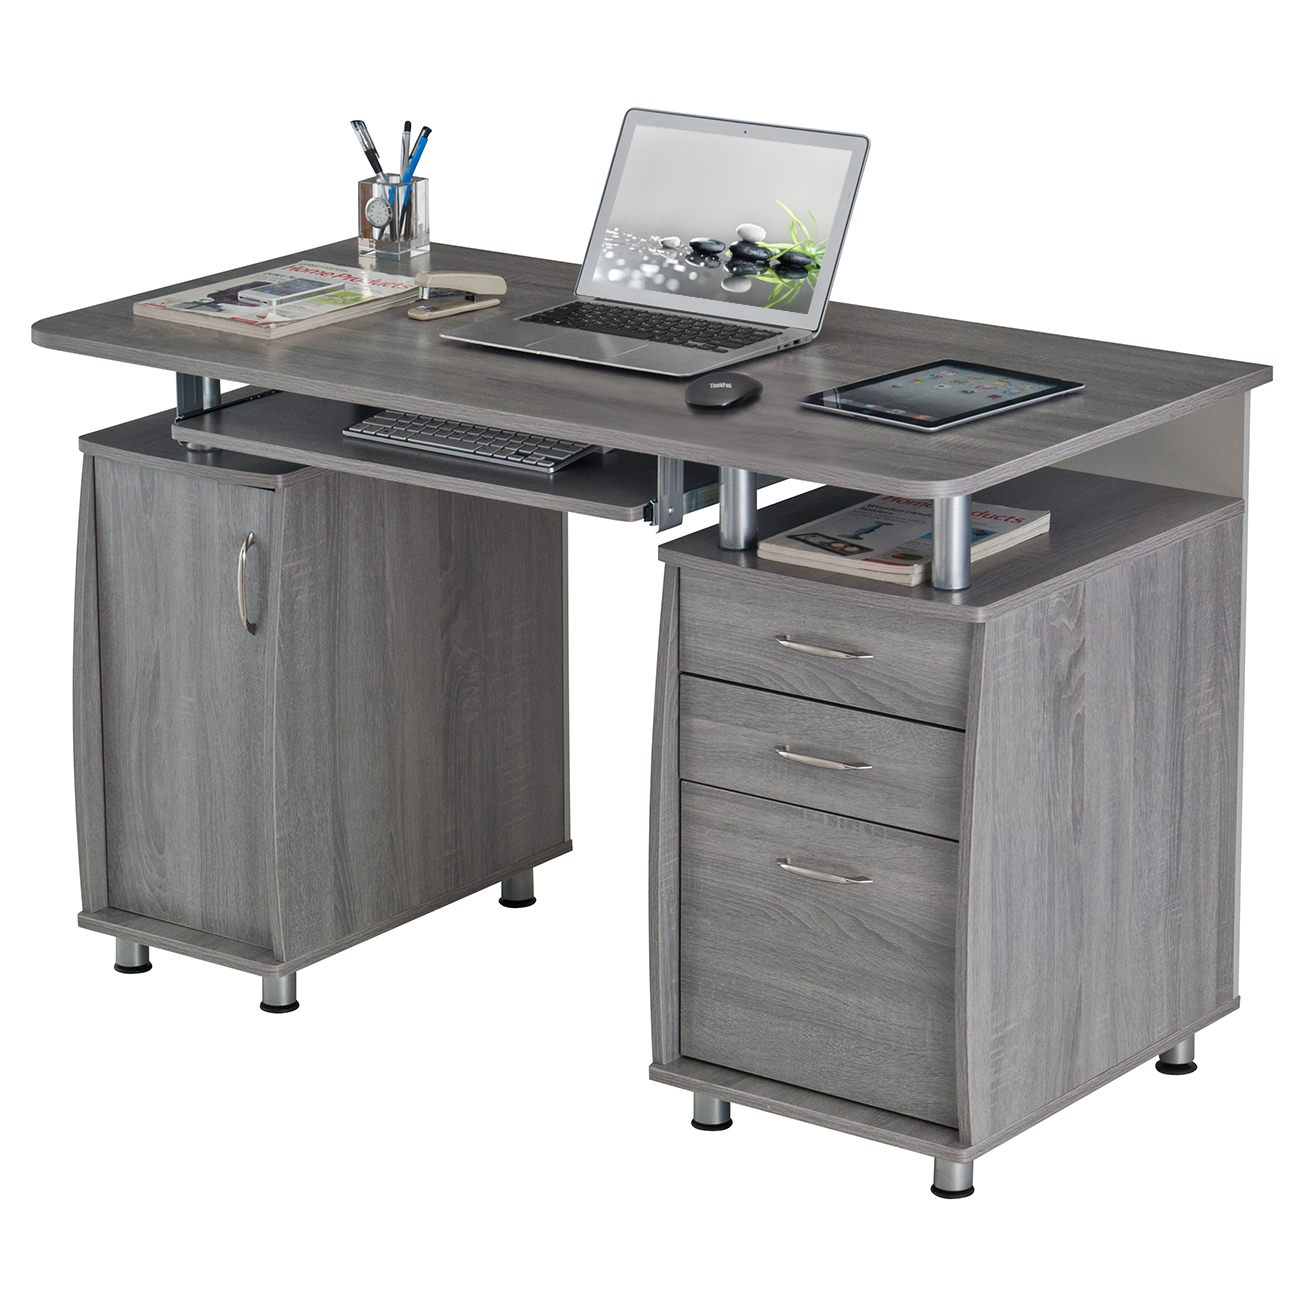 Techni Mobili Complete Adult Computer Workstation with Cabinet and Drawers, 30" H, Gray - image 2 of 11